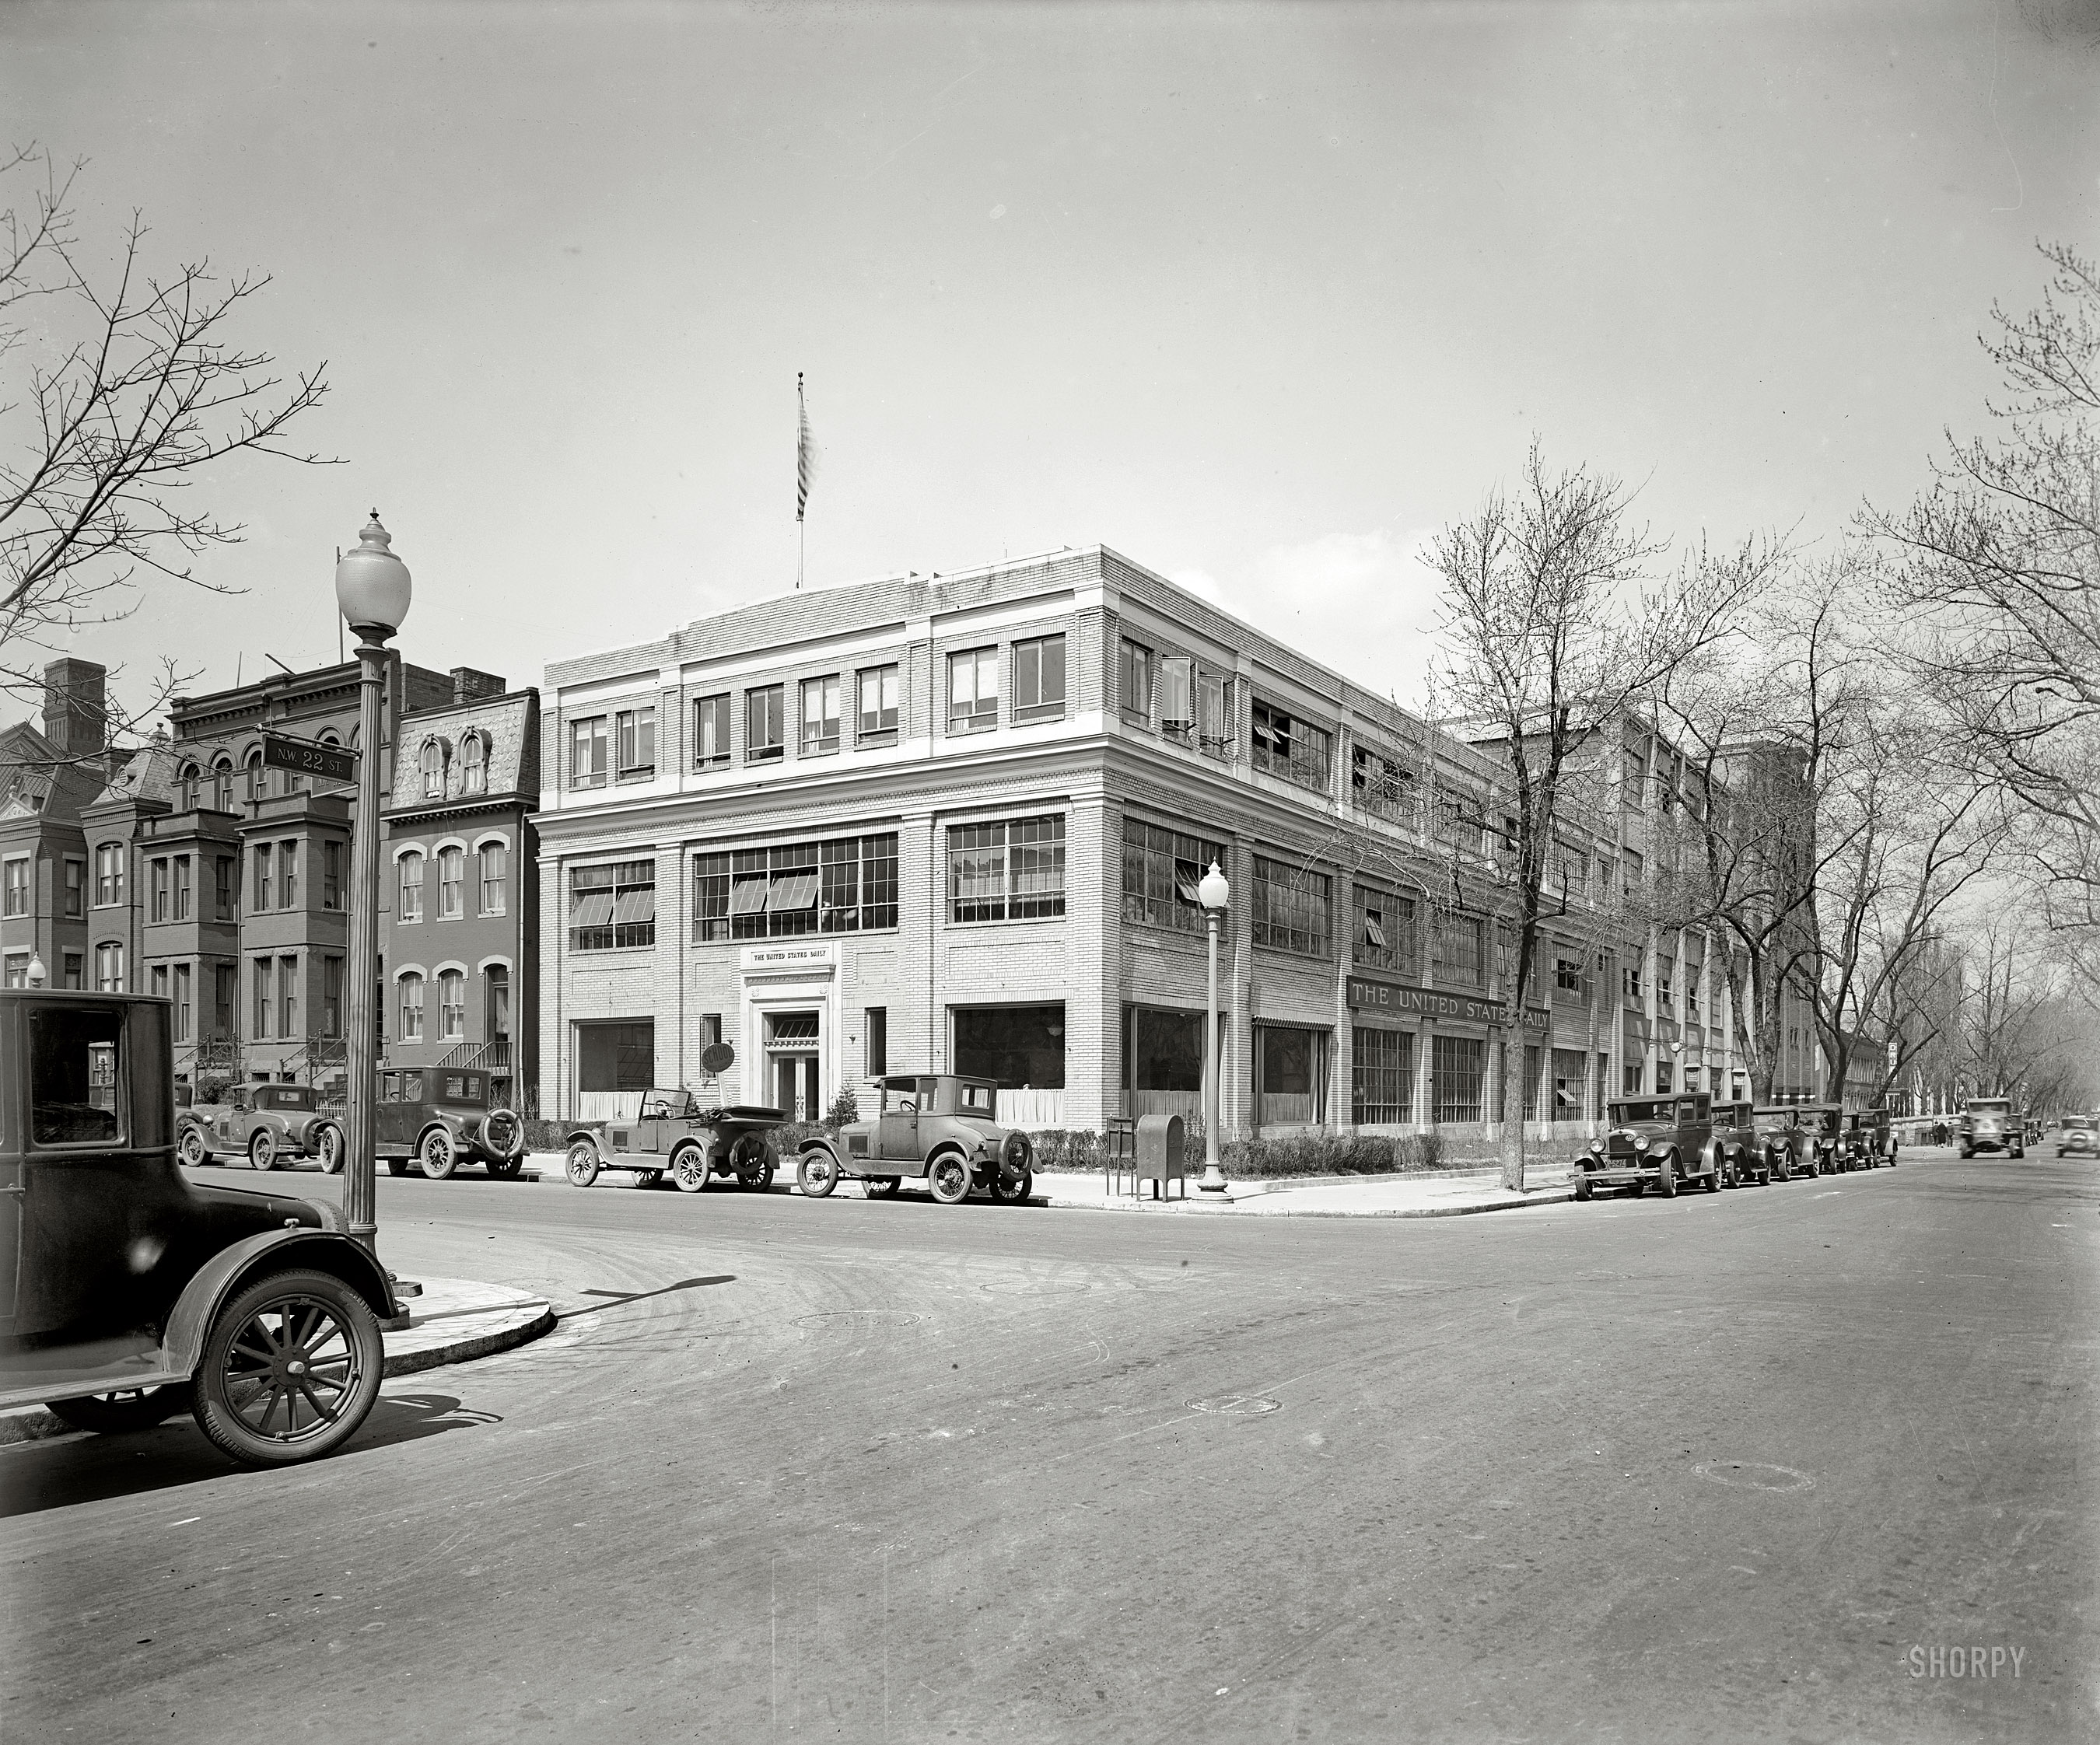 Washington, D.C., circa 1928. "U.S. Daily." This "national newspaper of vital importance," at 22nd and M streets, reported daily on government affairs from 1926 to 1933, when it became a weekly. National Photo Co. View full size.